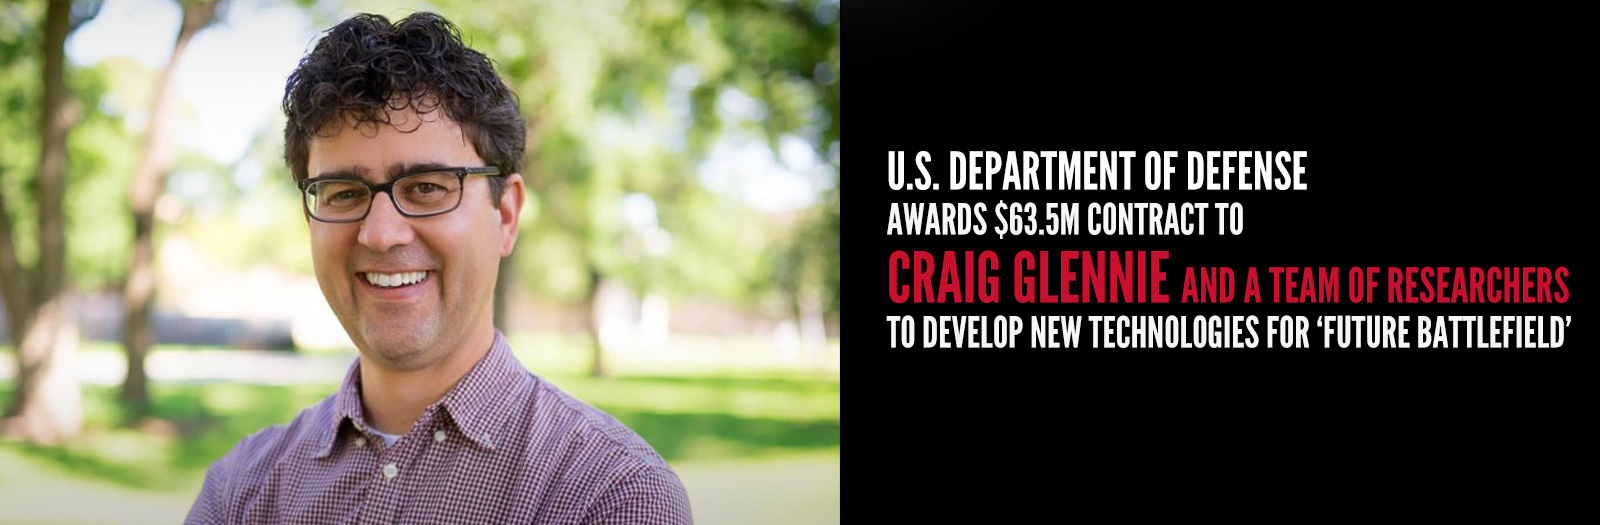 U.S. Department of Defense Awards $63.5M Contract to Craig Glennie and a team of Researchers to Develop New Technologies for ‘Future Battlefield’